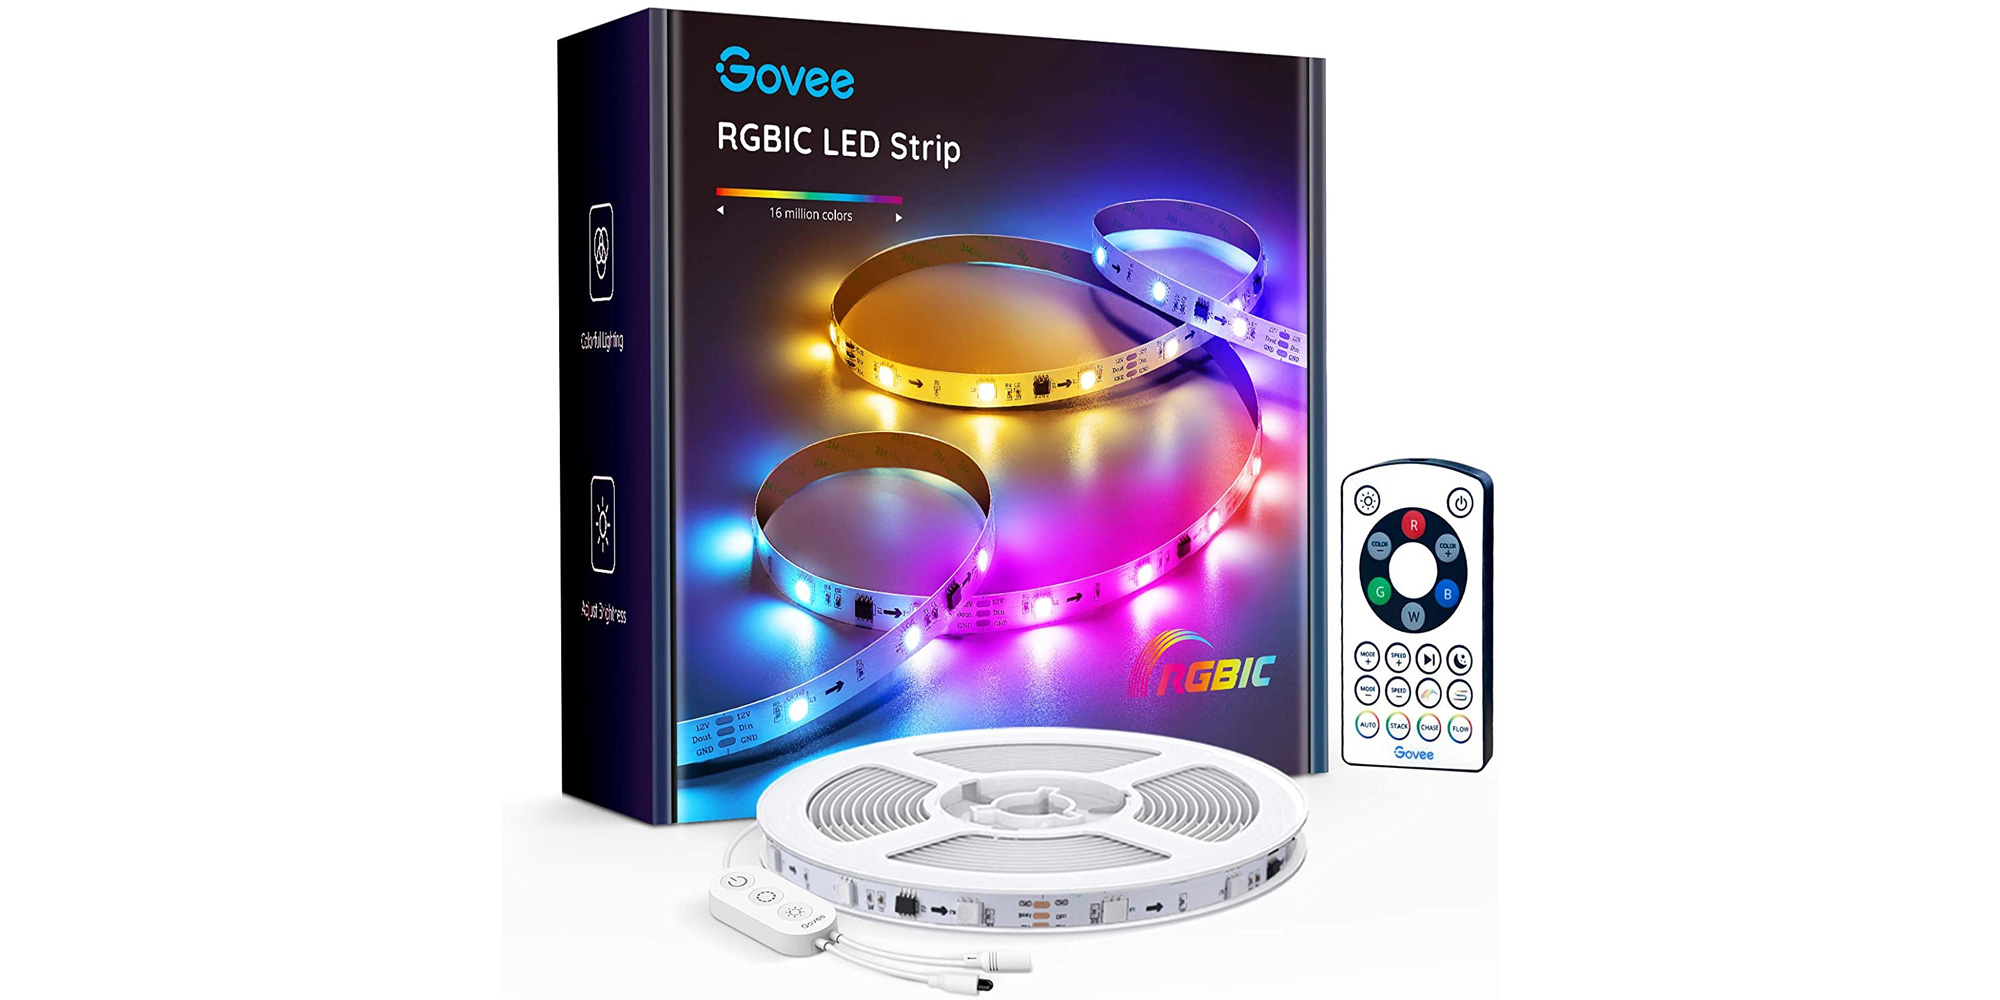 Govee's budget-focused 16.4-foot RGBIC LED light strip sees 50